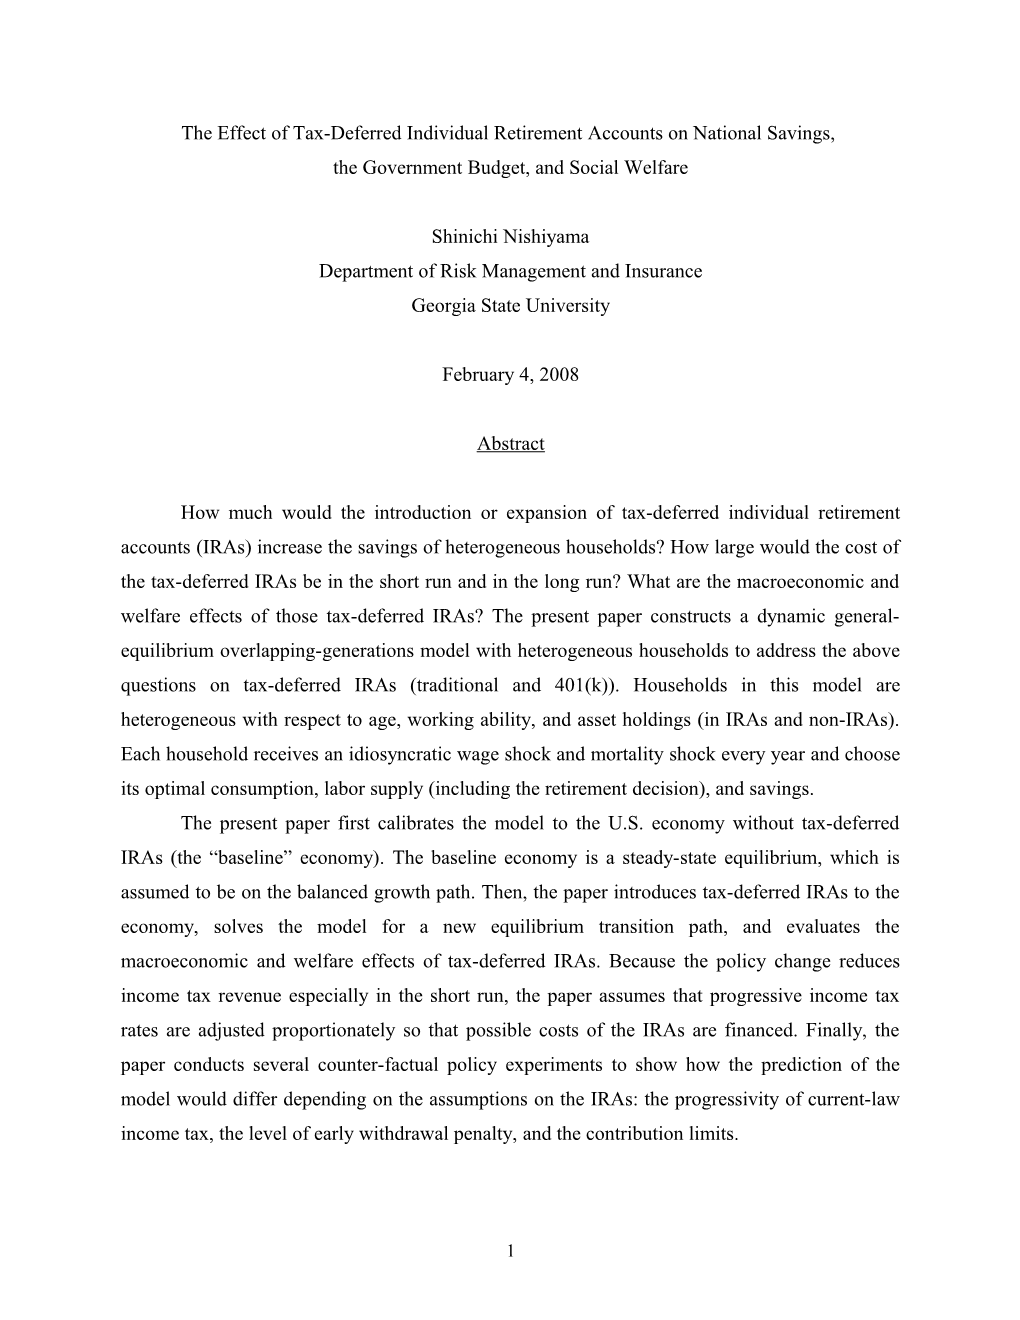 Title: the Effect of Tax-Deferred Individual Retirement Accounts on National Savings, Government